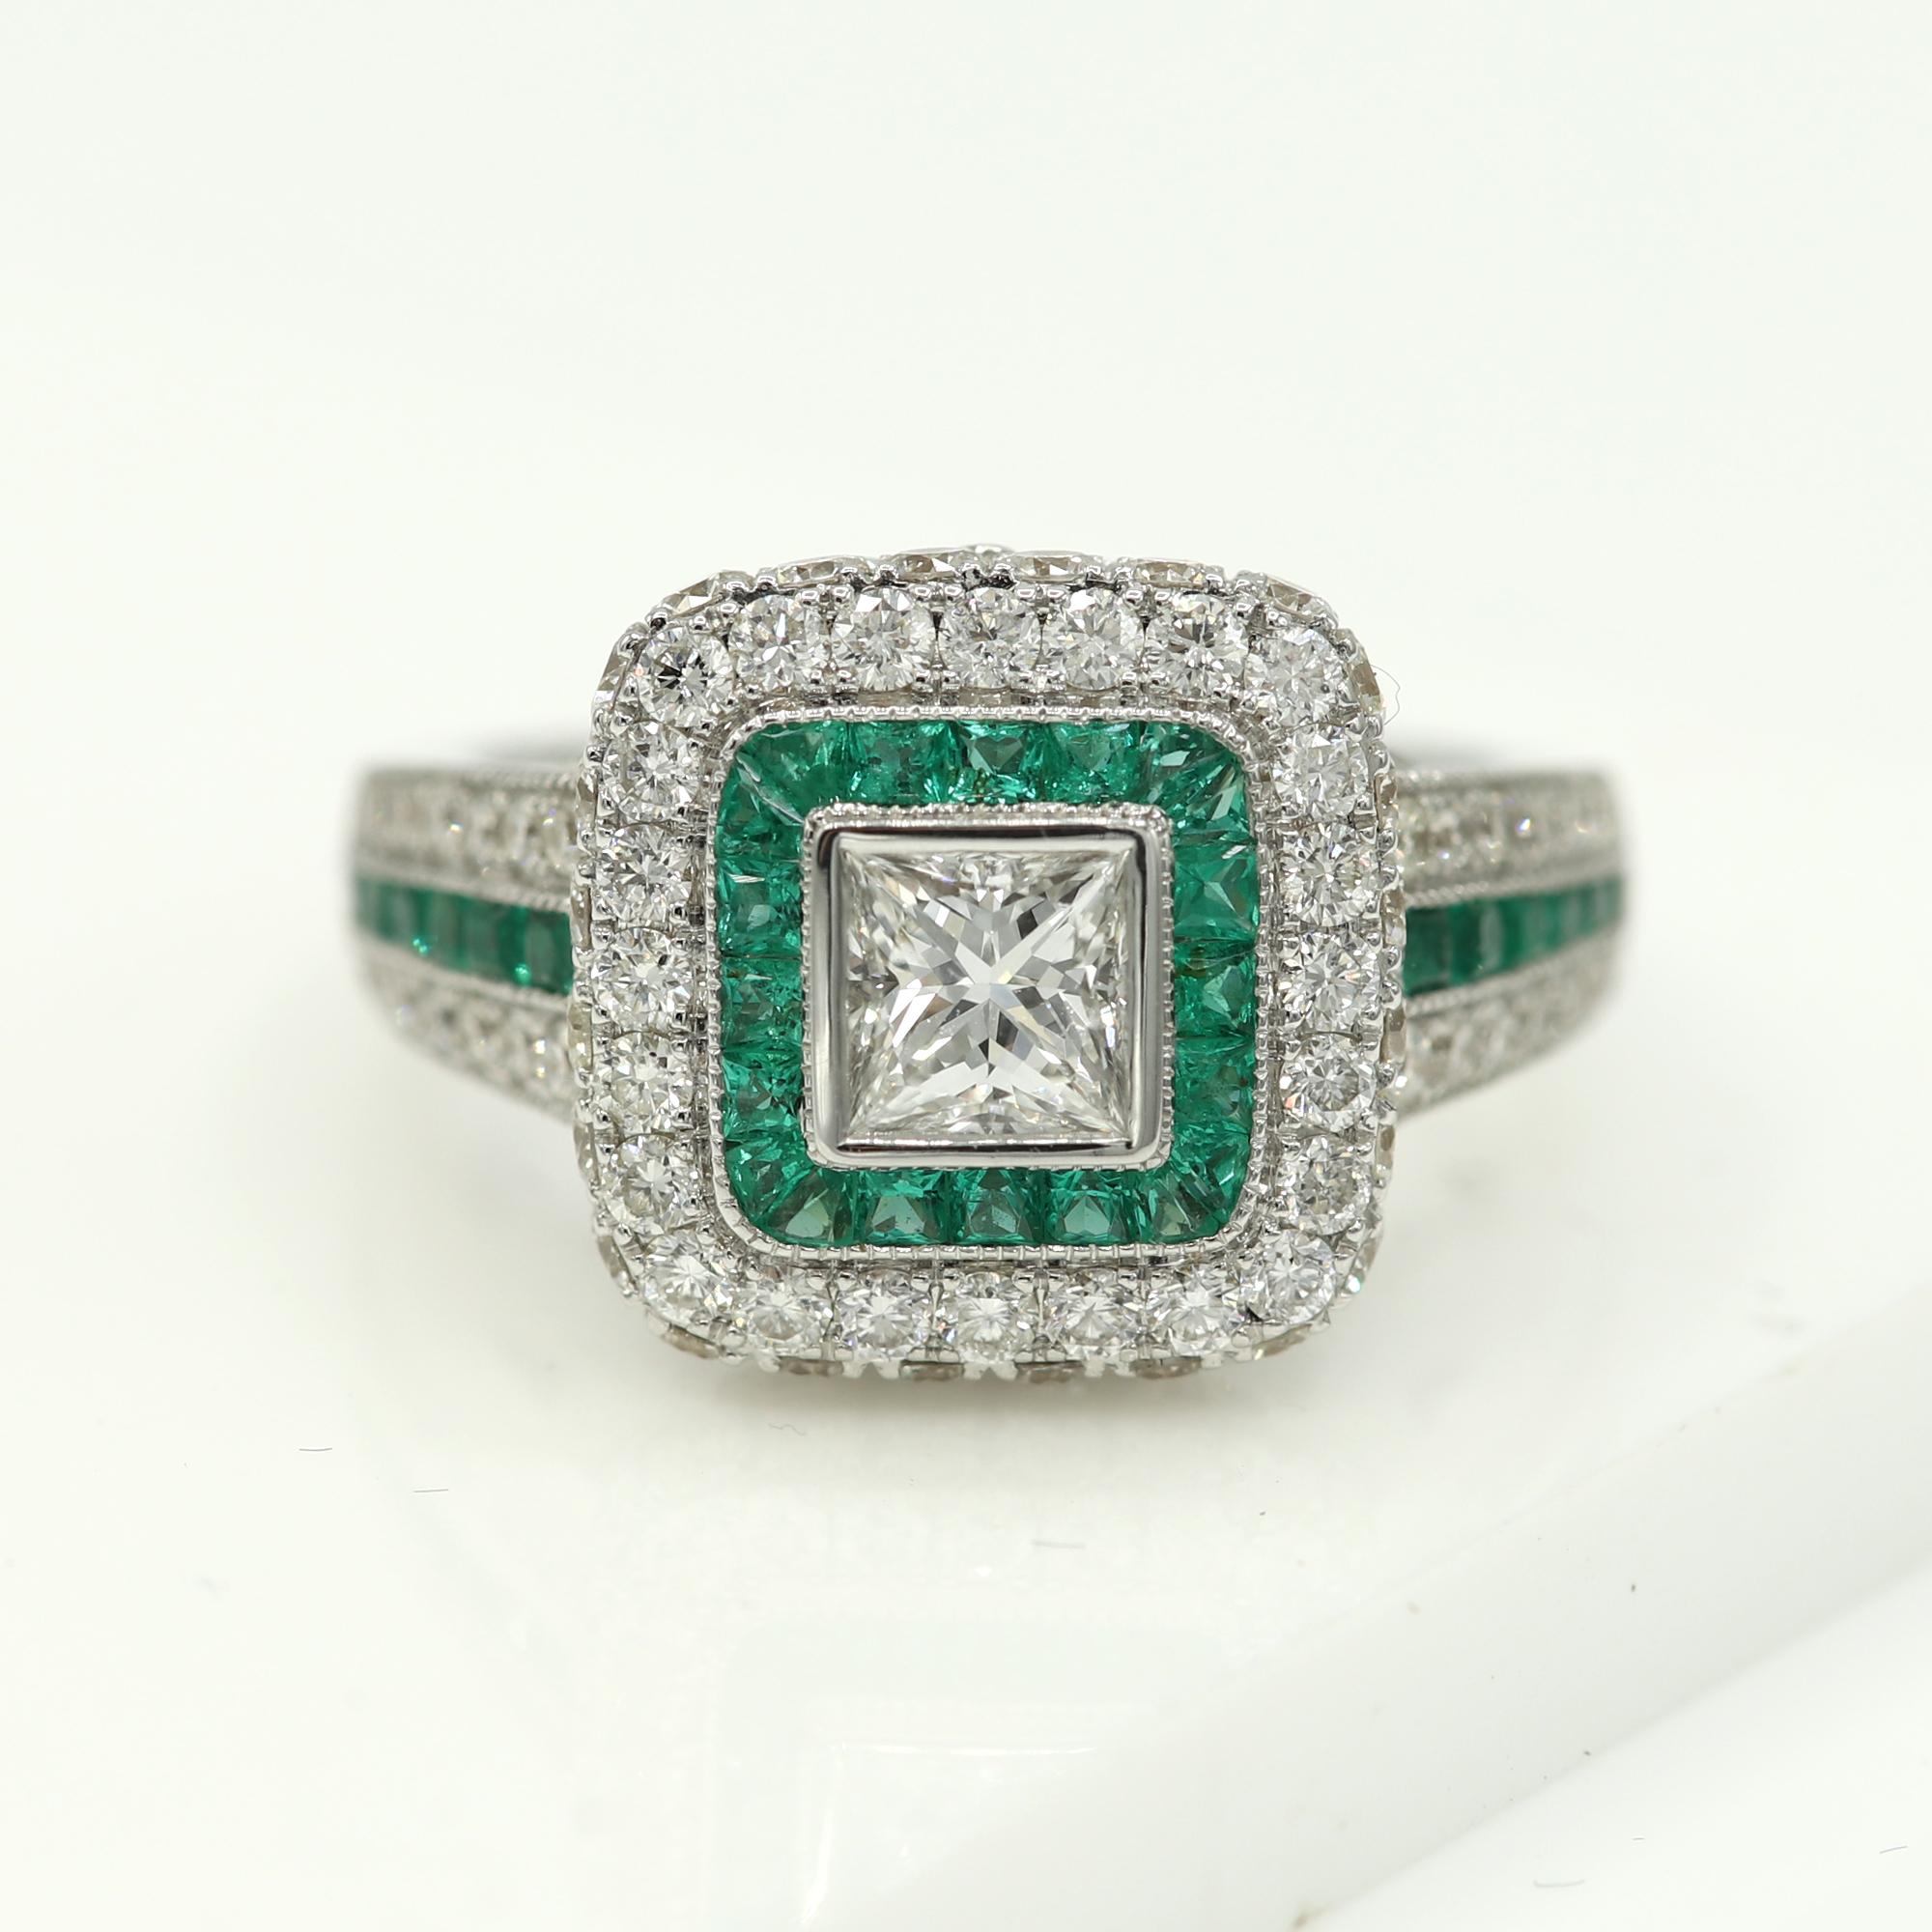 Brilliant Art Deco Style Ring. 18k White Gold 9.70 grams. Total all Diamonds 2.10 carat (center stones is princess cut Diamond 0.56 carat) Emeralds total 0.97 carat. overall design area size on the top is 13 x 13 mm. Finger size 7.
diamond are HI-SI